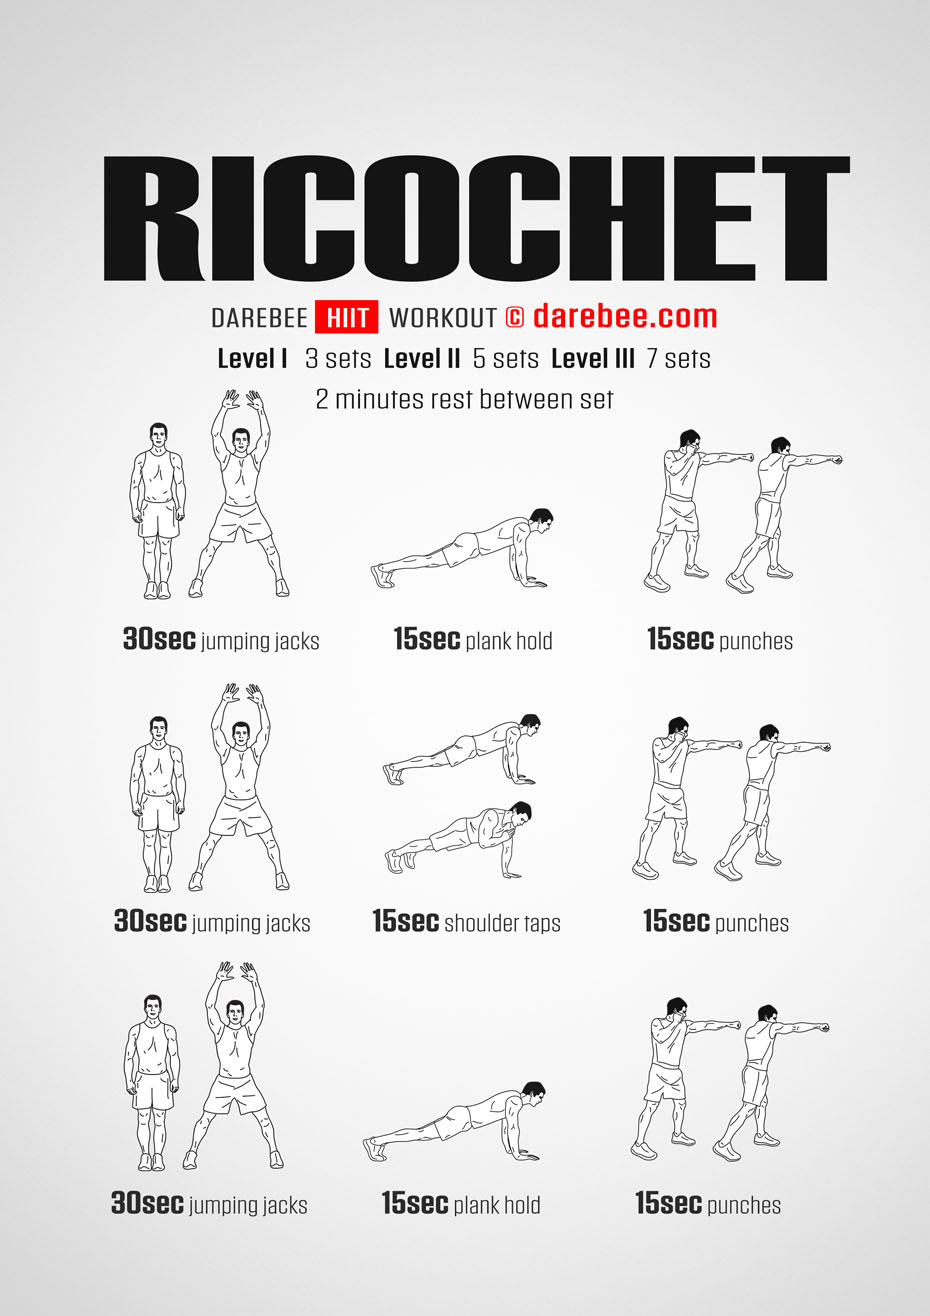 ricochet meaning